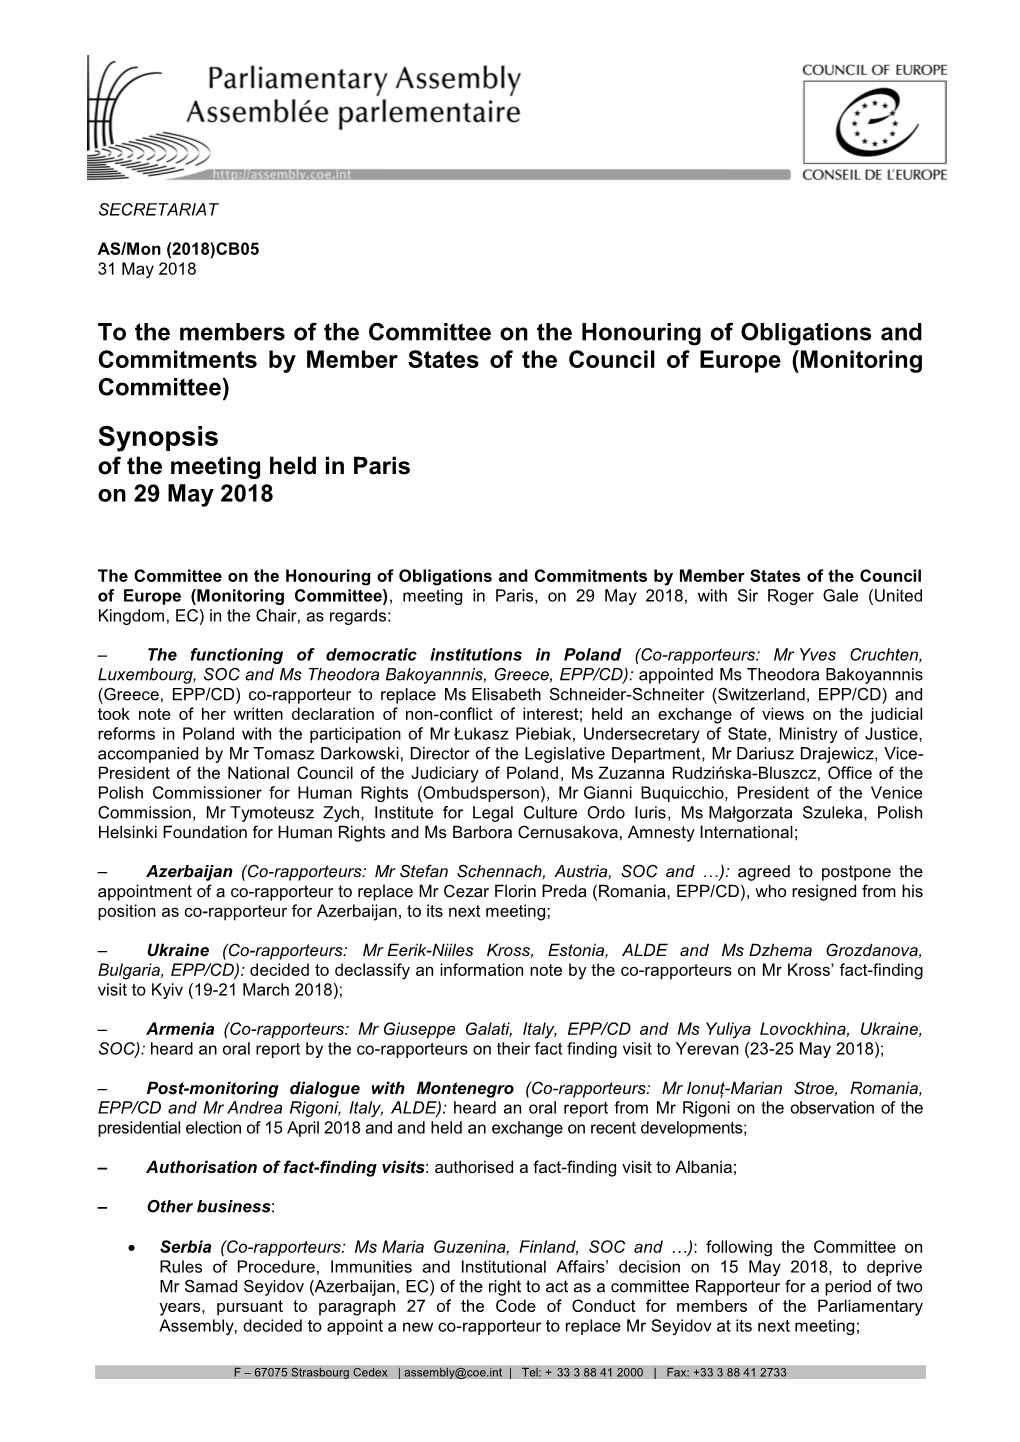 Synopsis of the Meeting Held in Paris on 29 May 2018